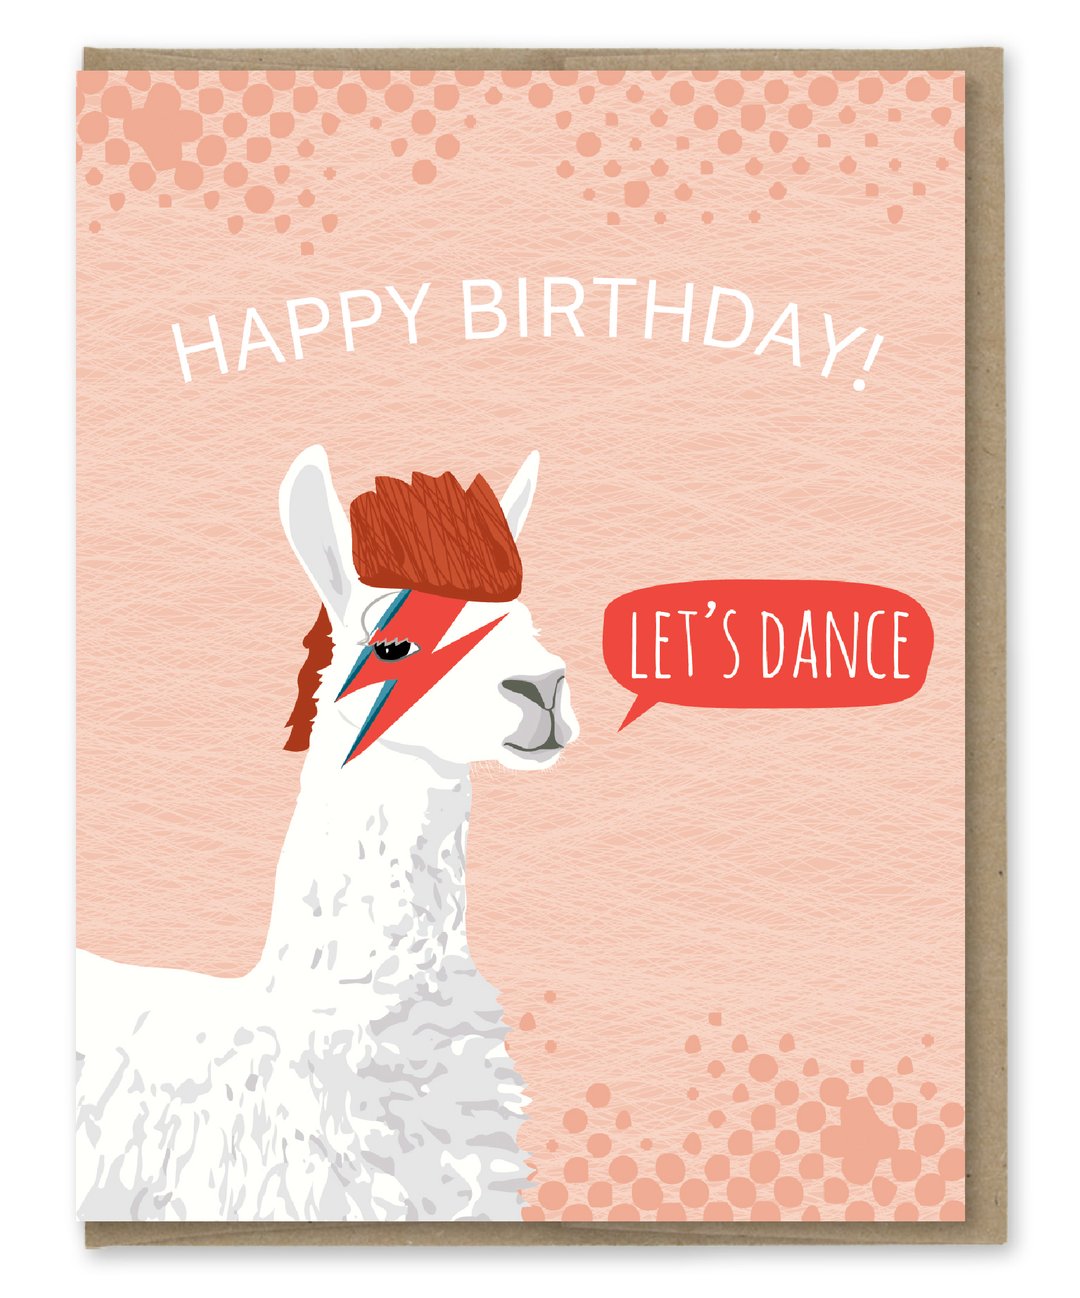 Greeting Cards by Modern Printed Matter